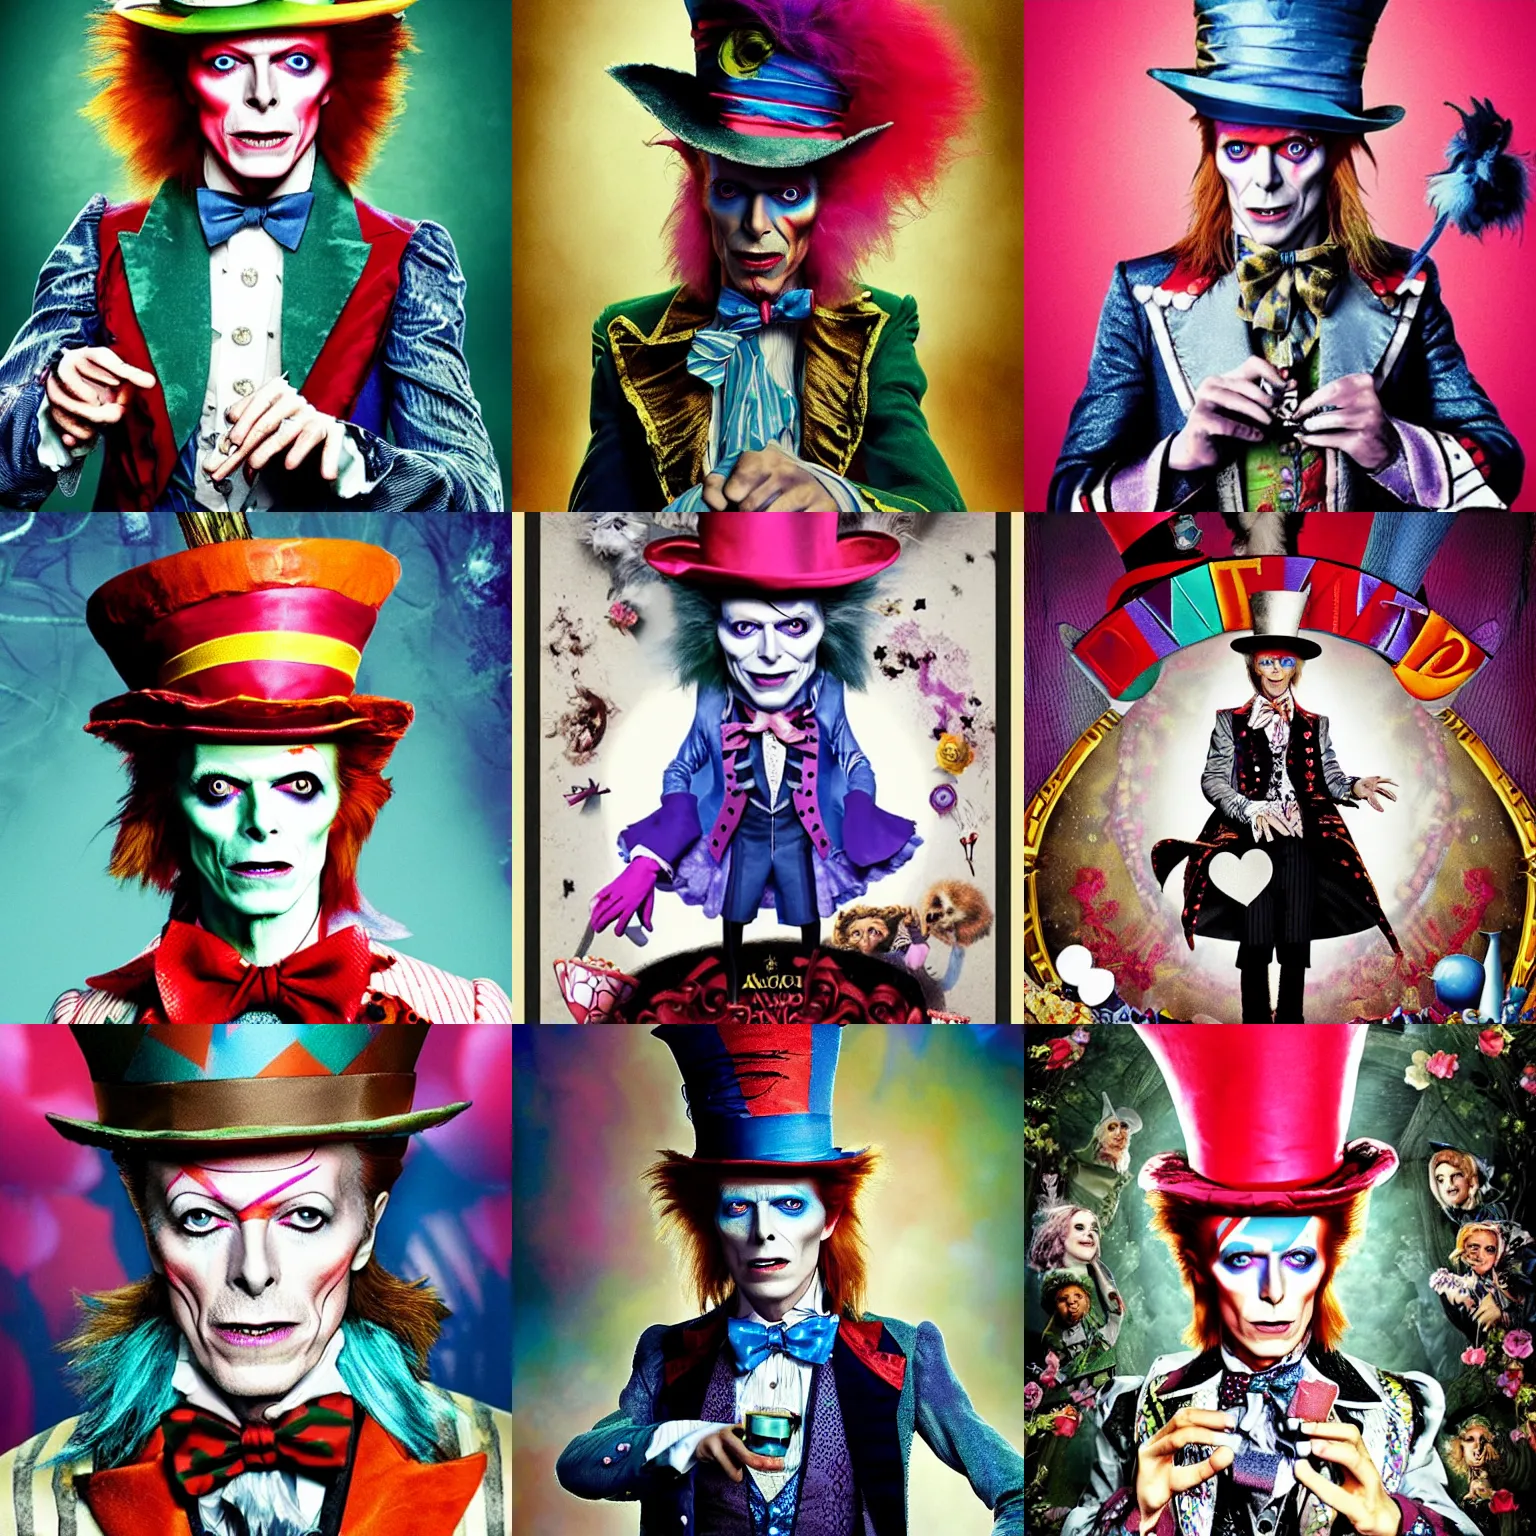 Prompt: David Bowie as the Mad Hatter in the film poster of Alice in Wonderland (2010)